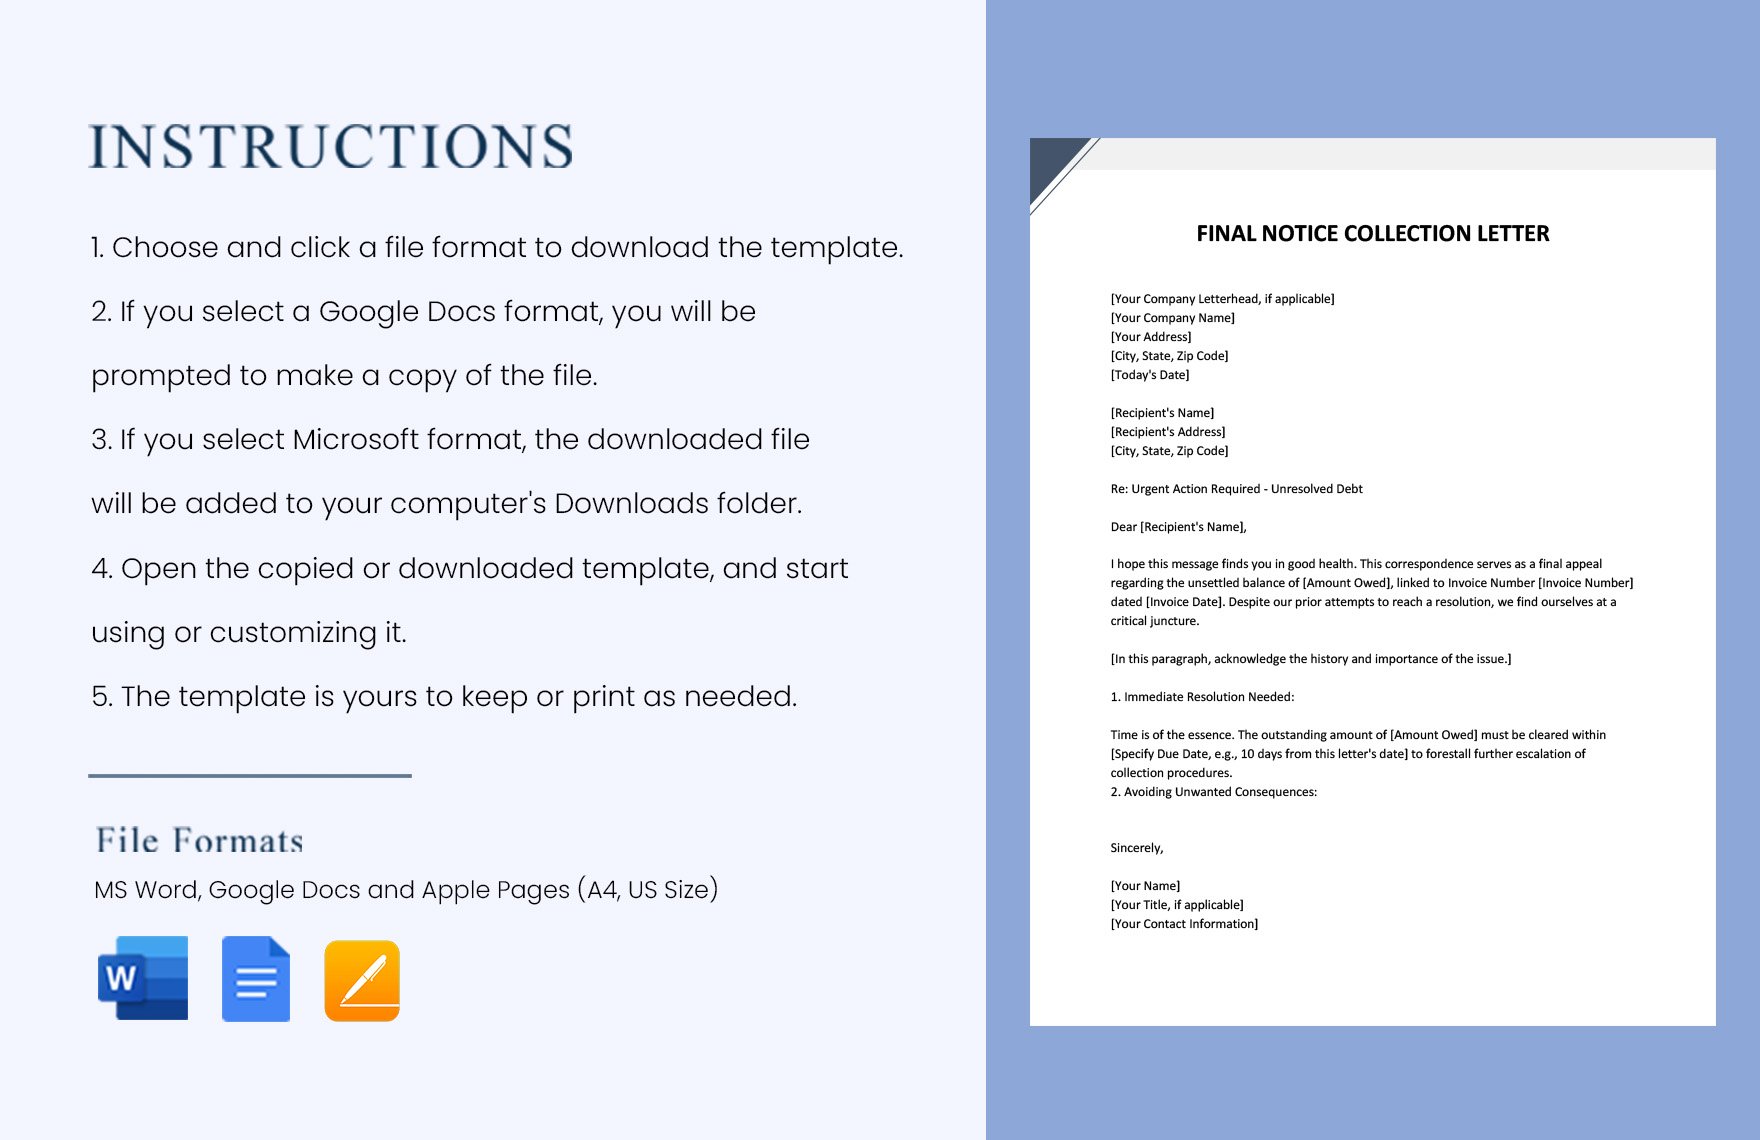 Final Notice Collection Letter